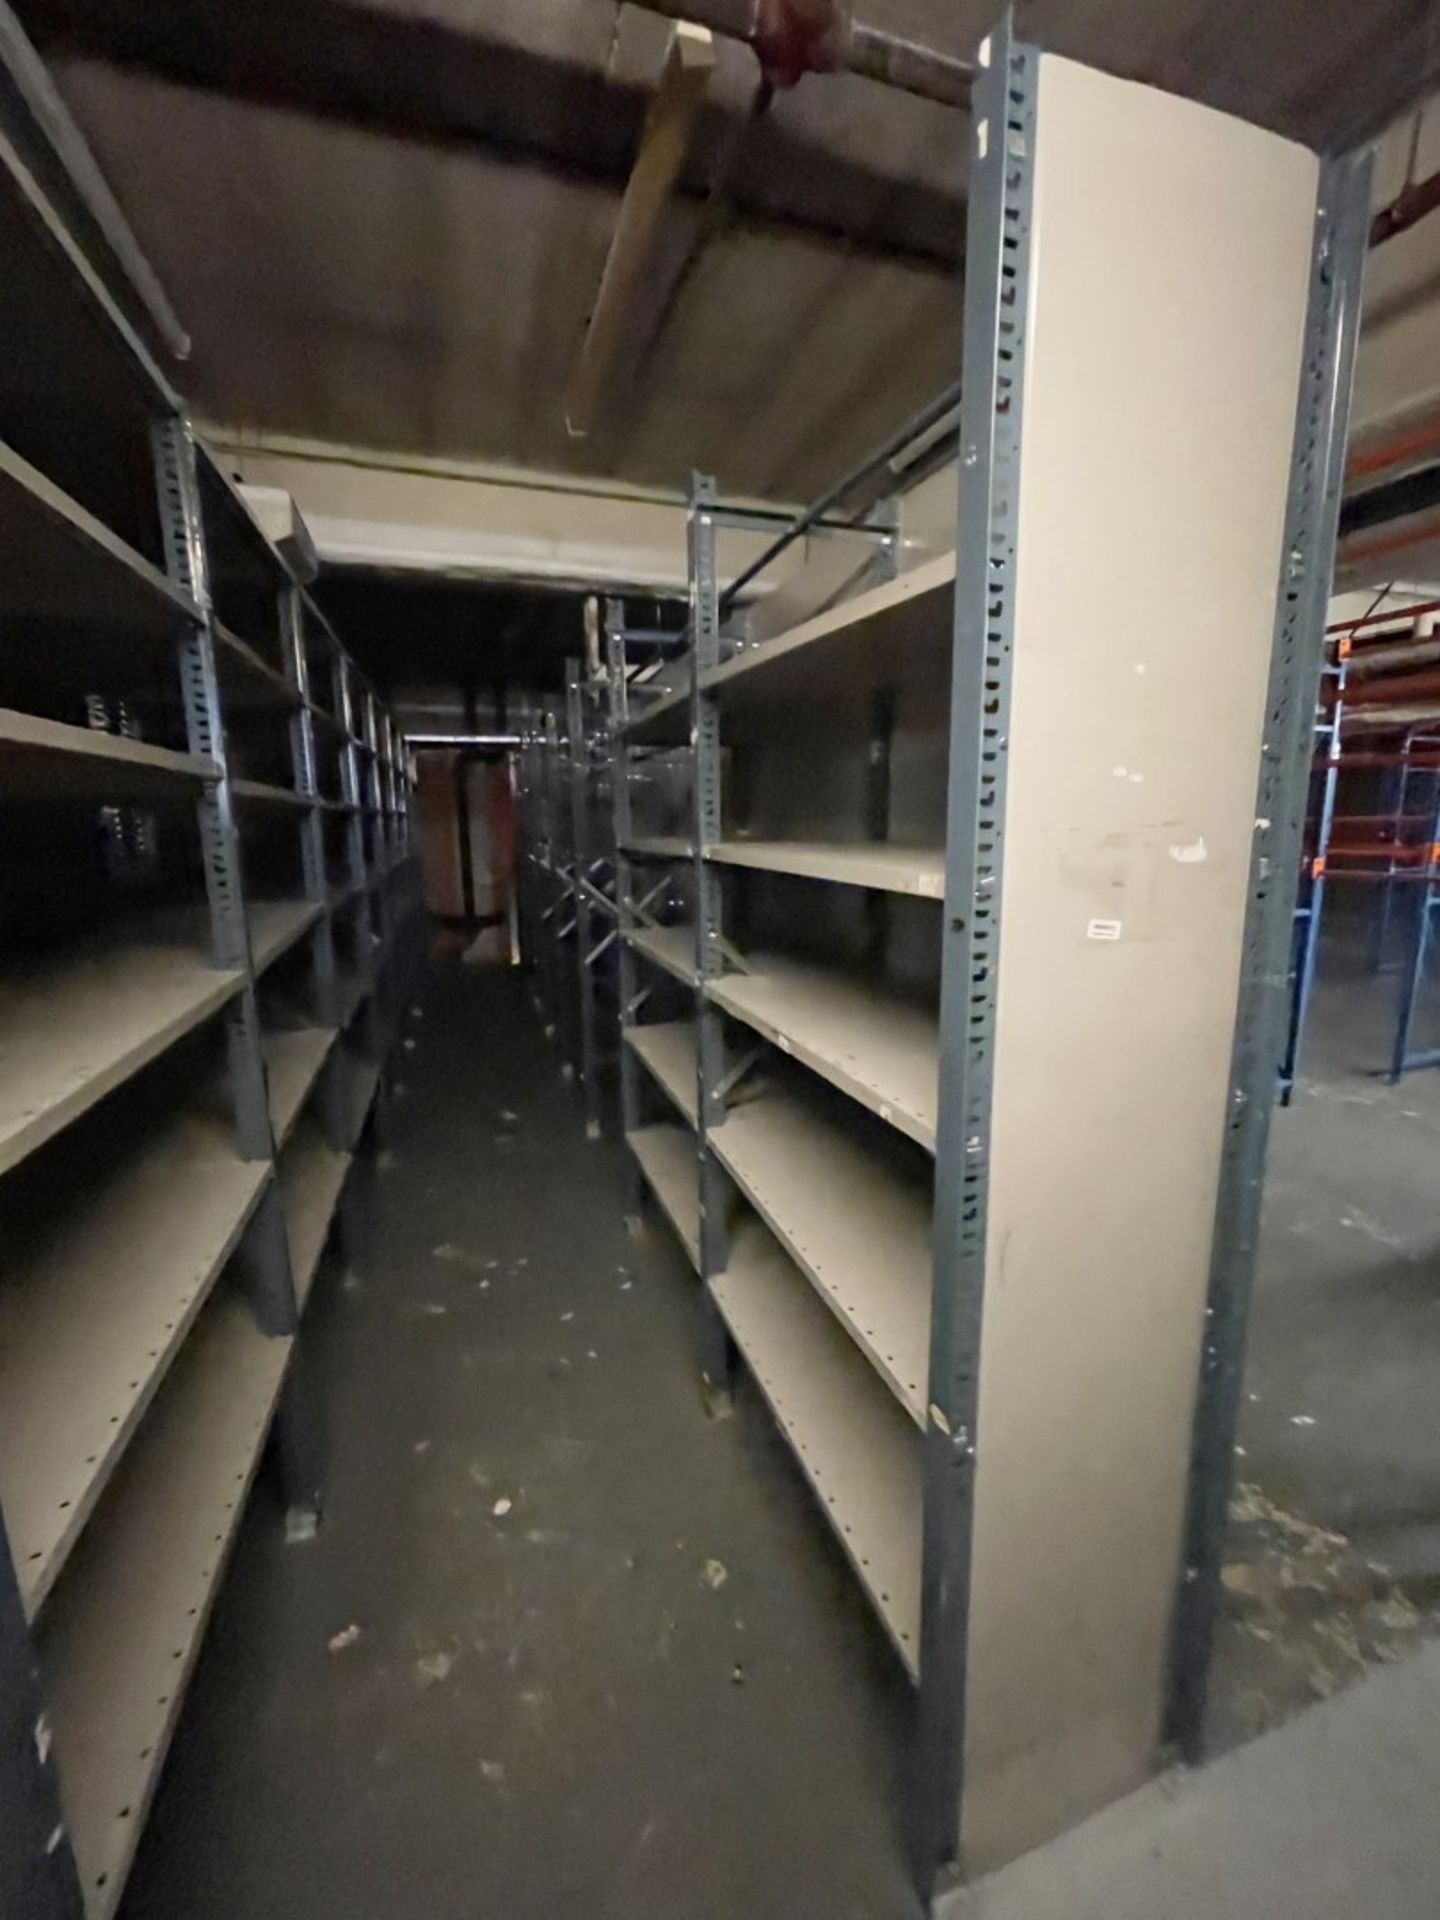 8 x Bays of Metal Warehouse Storage Shelving and Clothes Rails - Includes 2 x Shelving Bays and 6 - Image 4 of 4